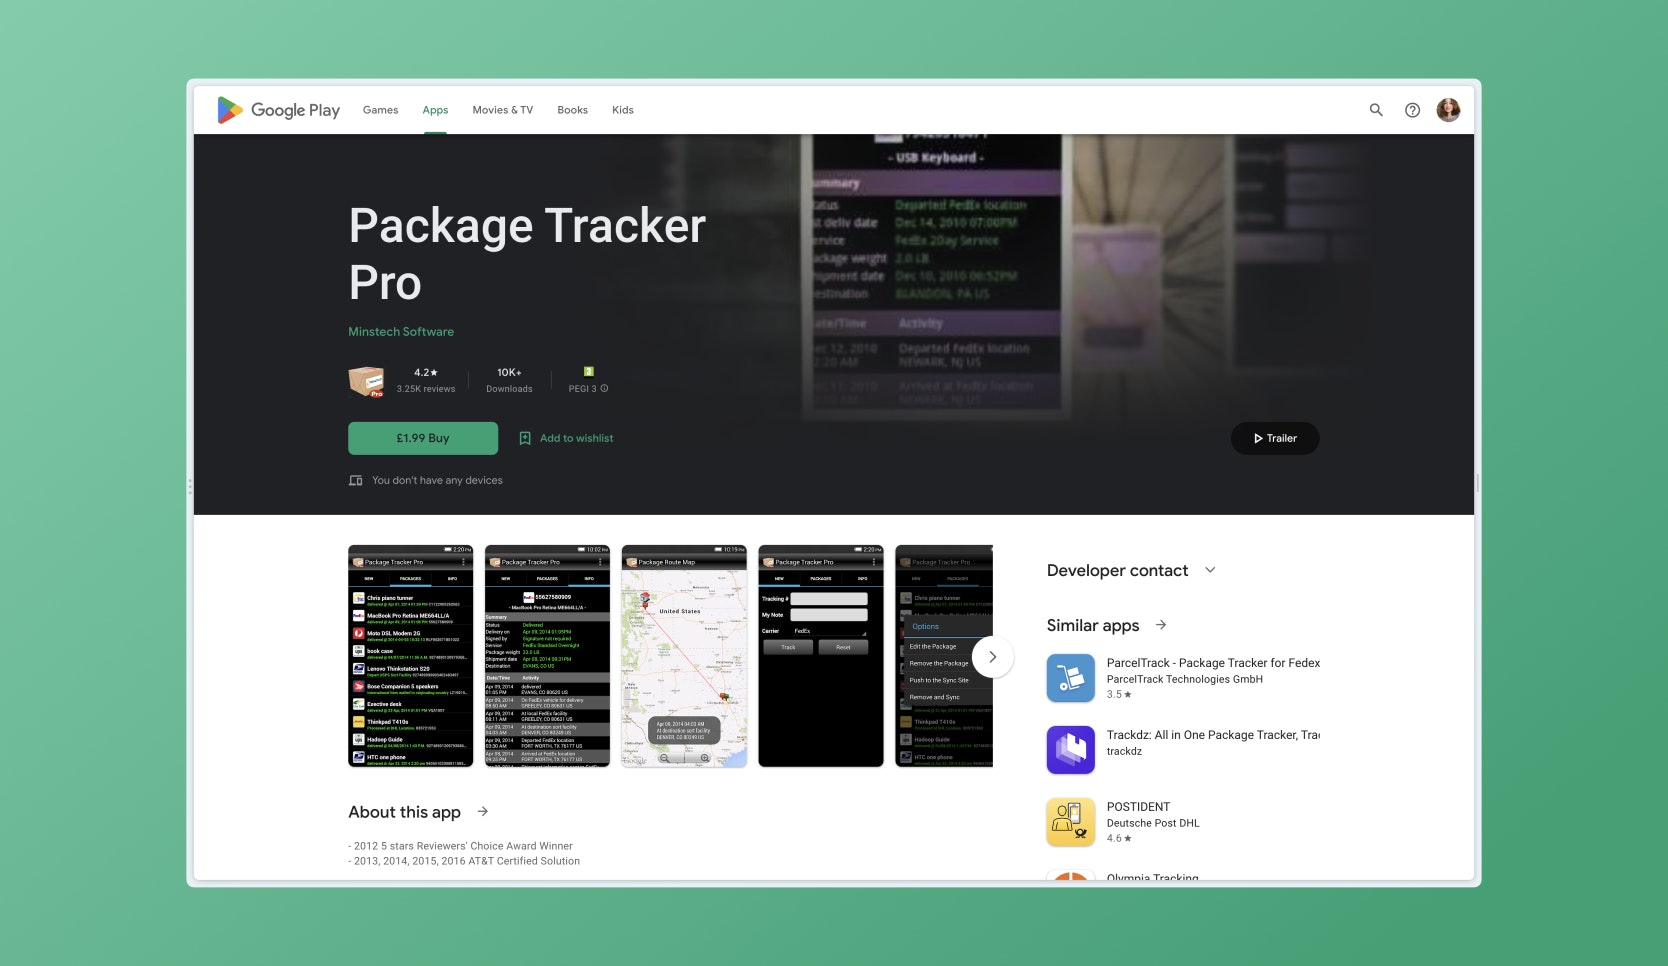 Google Playstore page for Package Tracker Pro